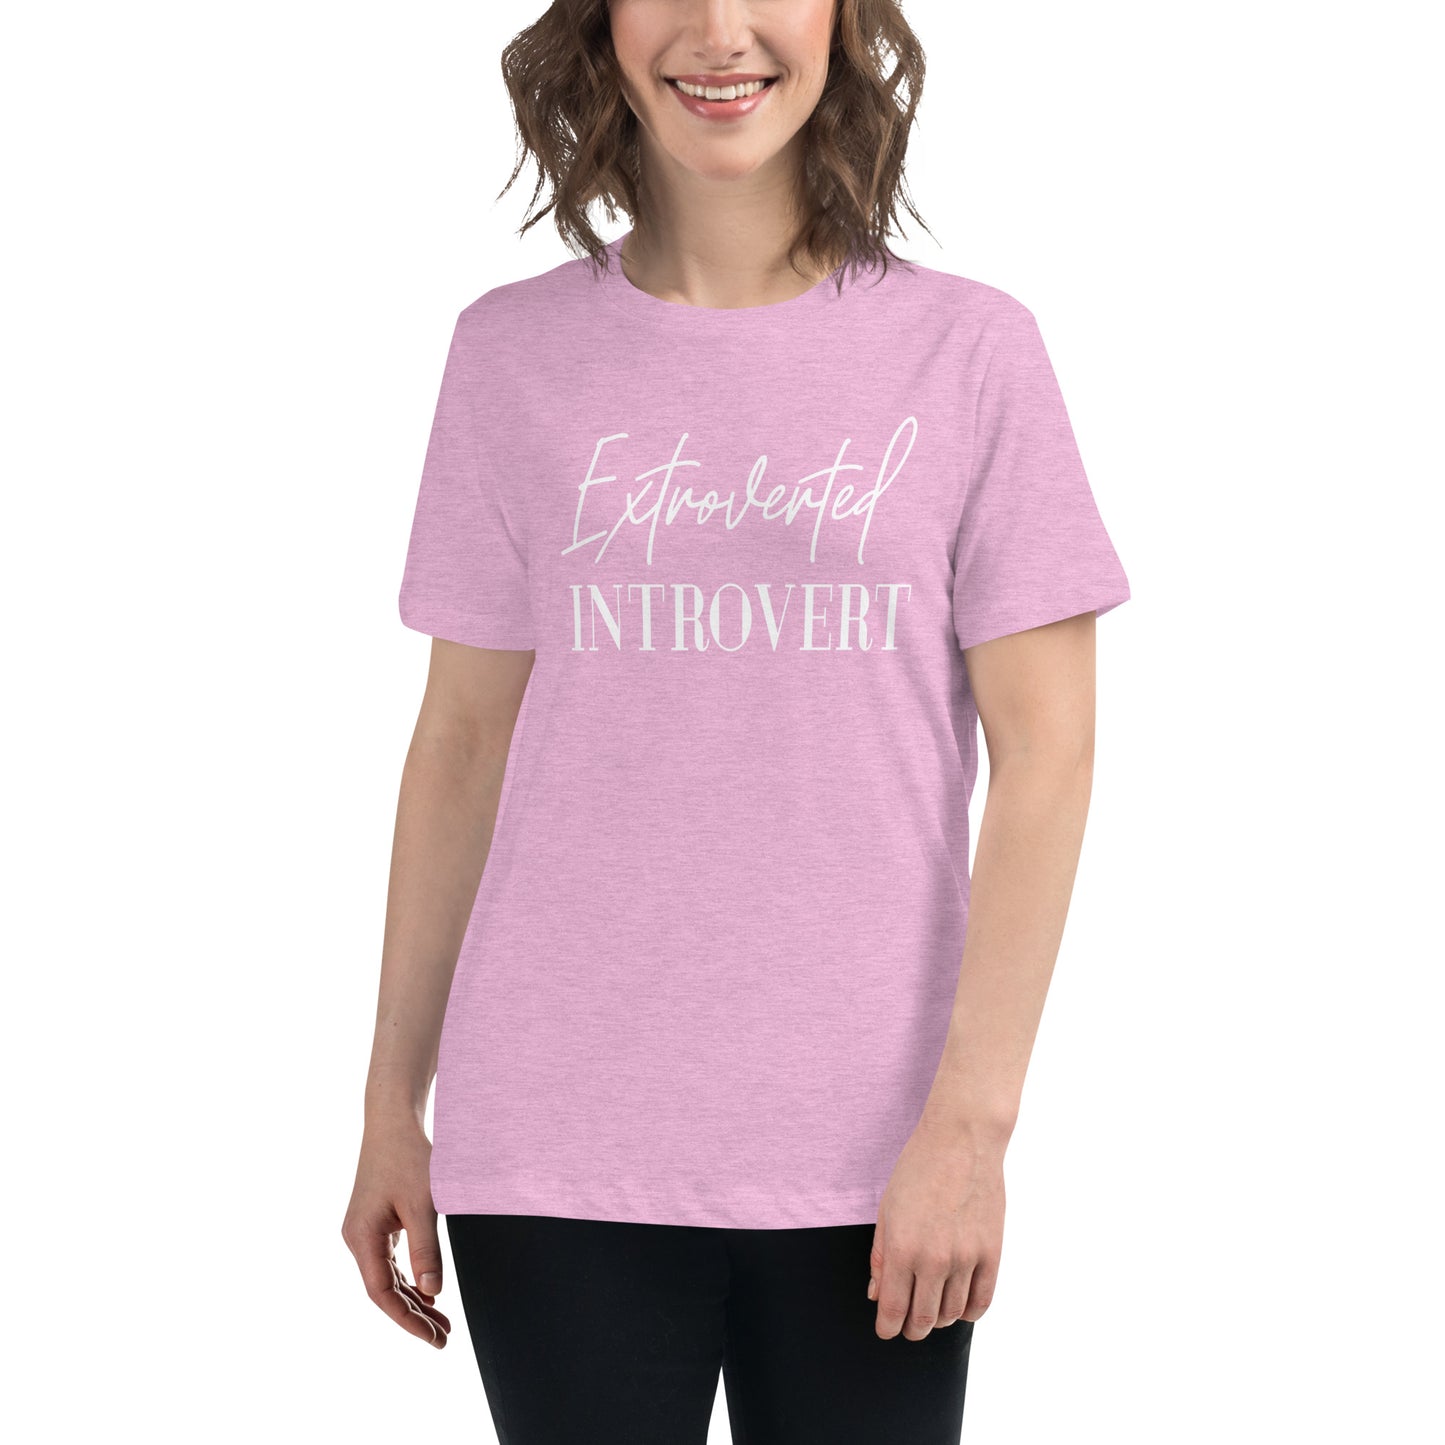 Extroverted Introvert Women's Relaxed T-Shirt